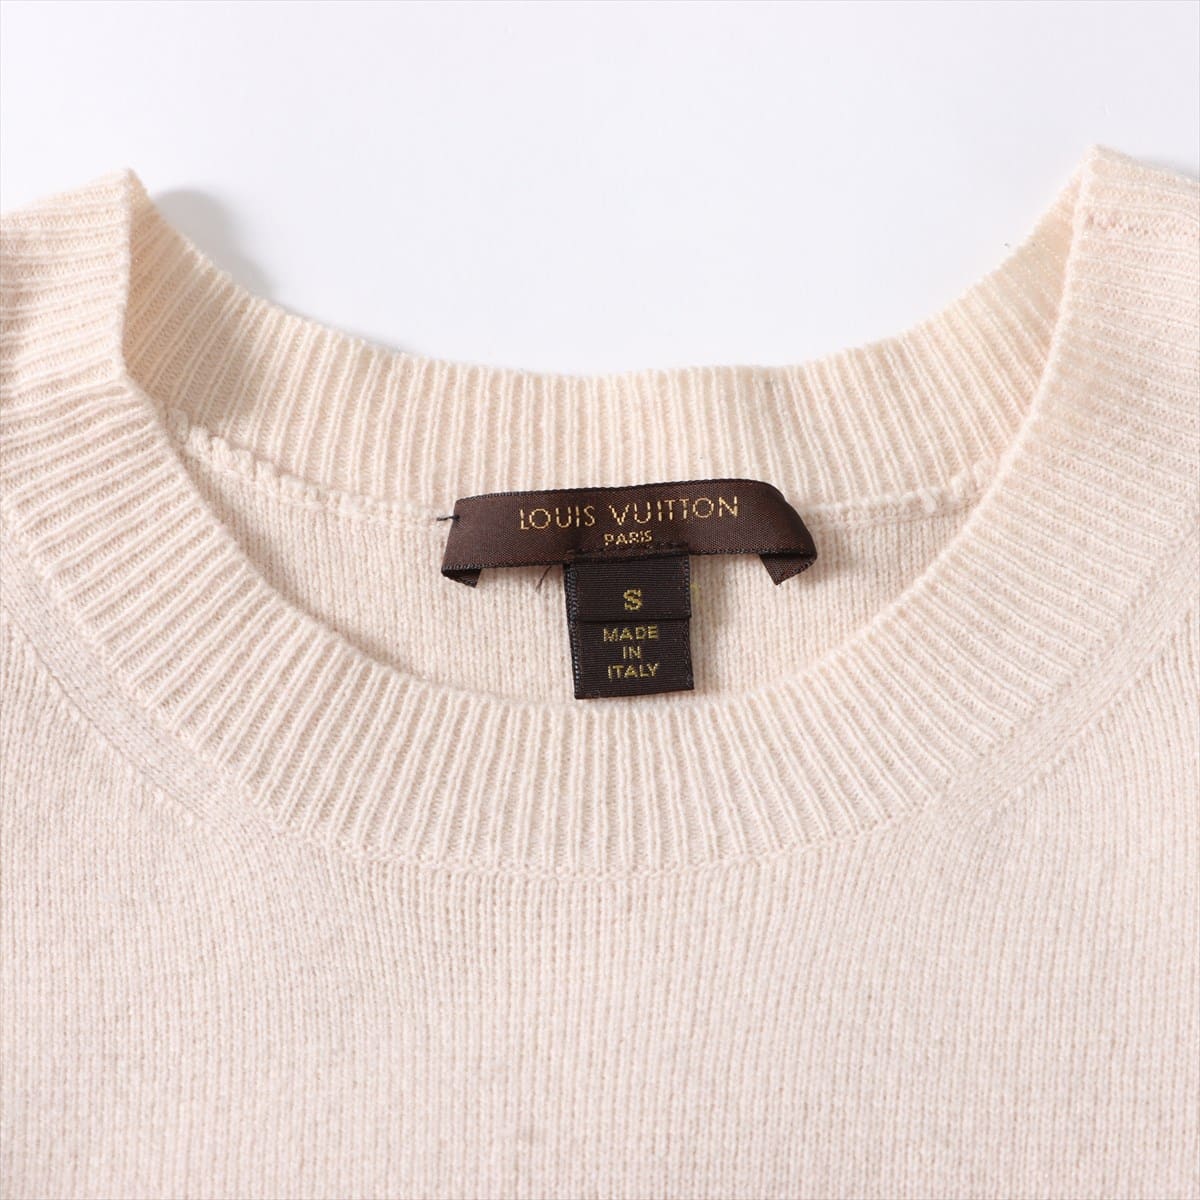 Louis Vuitton Other Knit dress S Ladies' Beige  There is a stain on the side, and the quality tag is gone